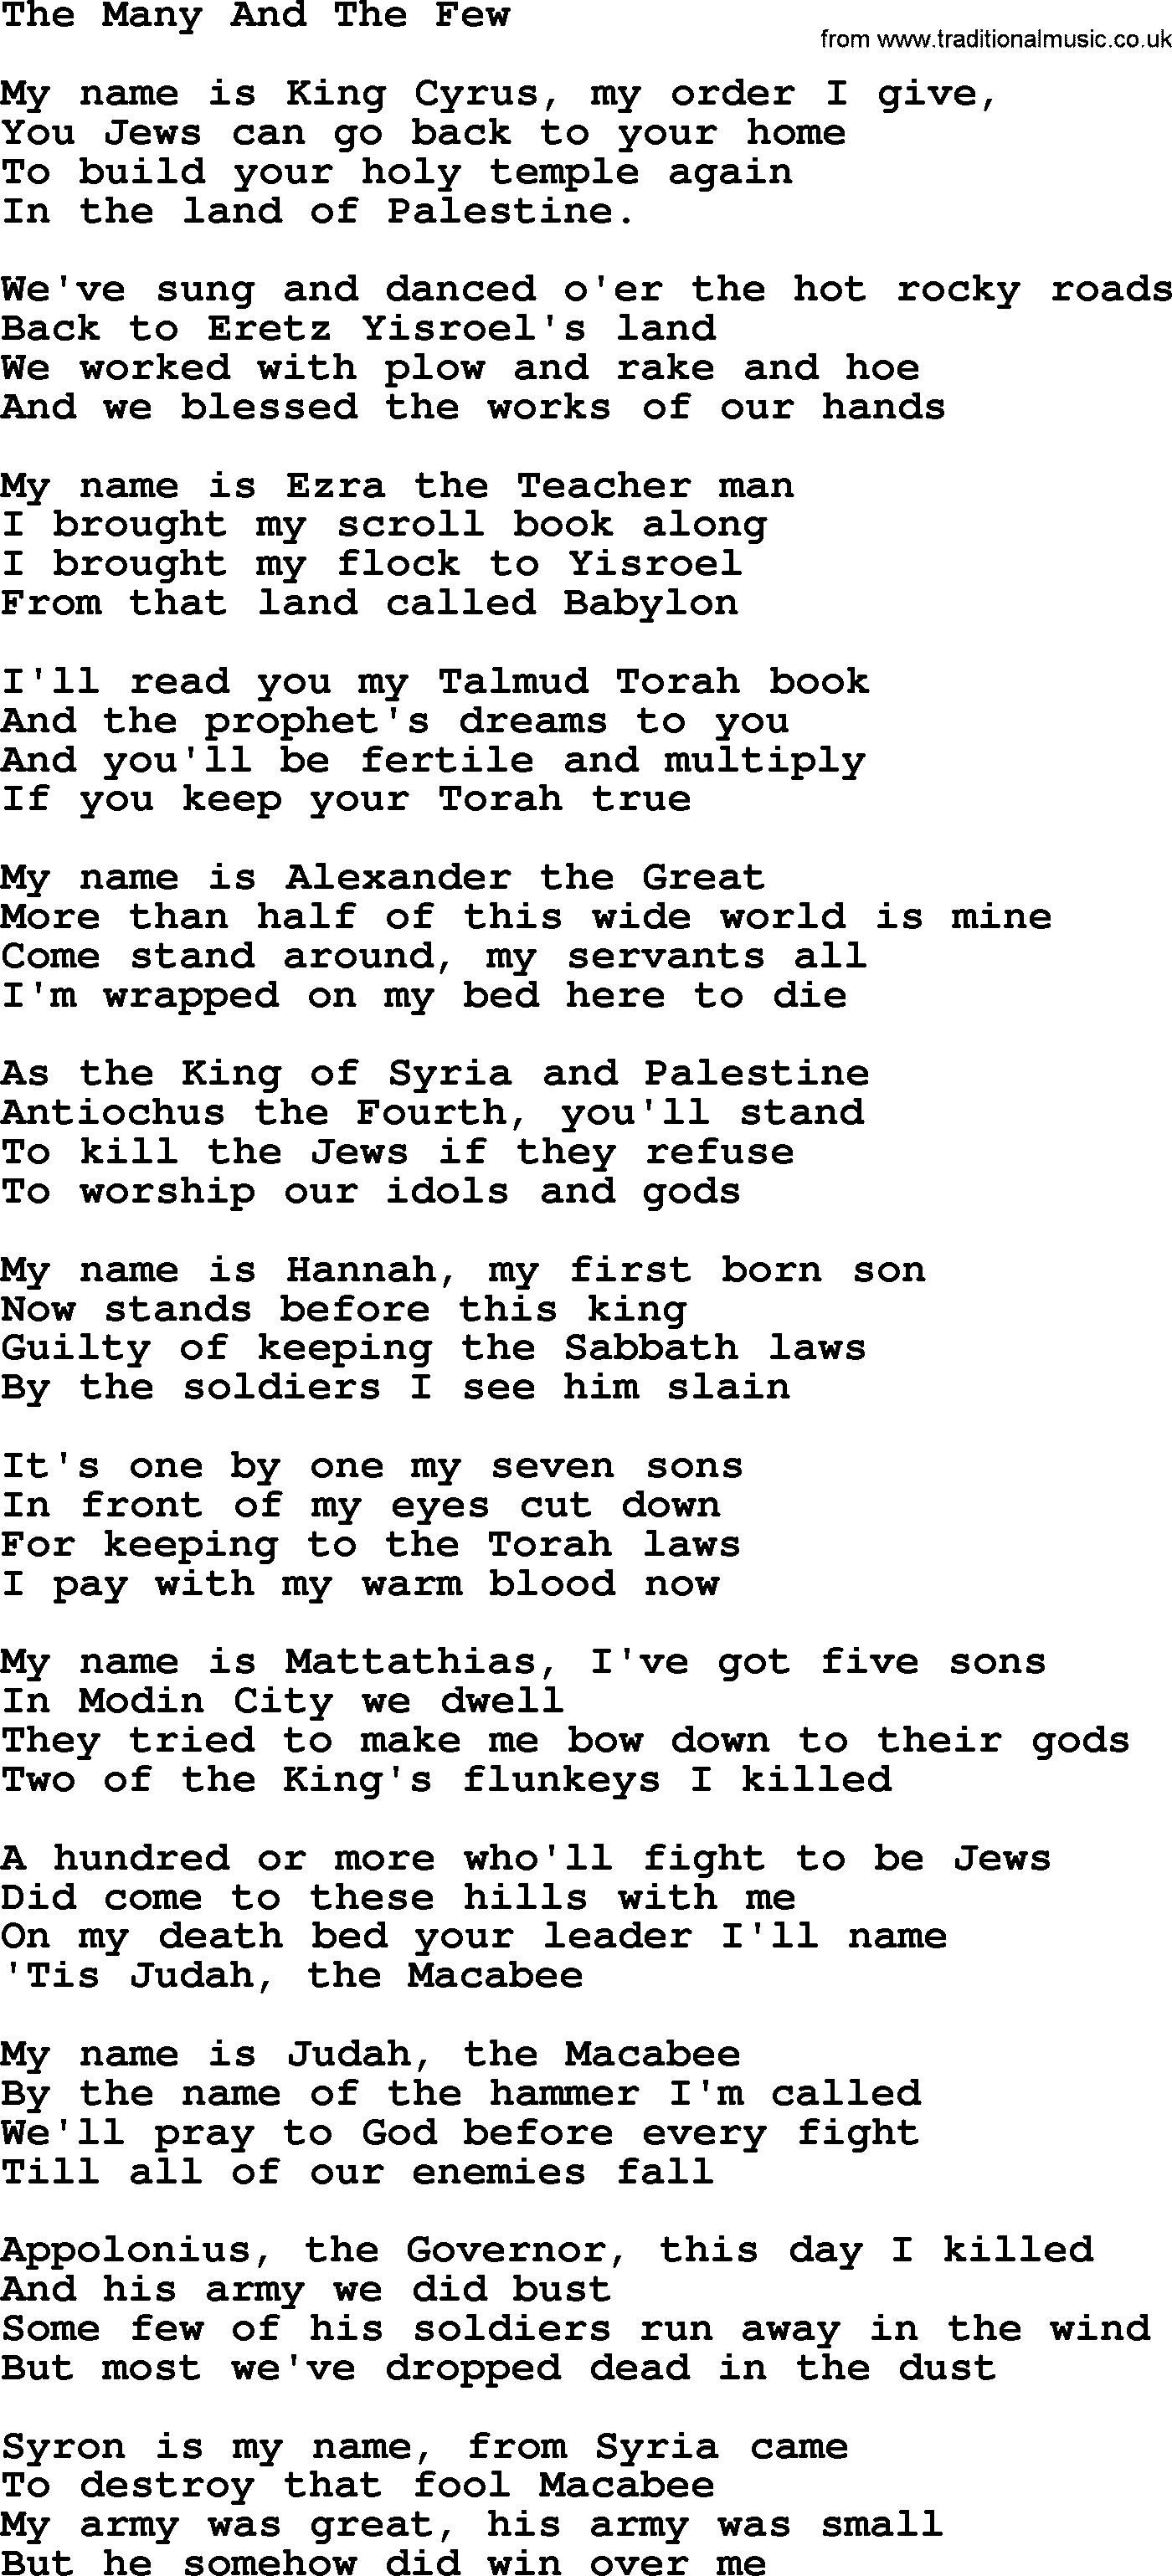 Woody Guthrie song The Many And The Few lyrics